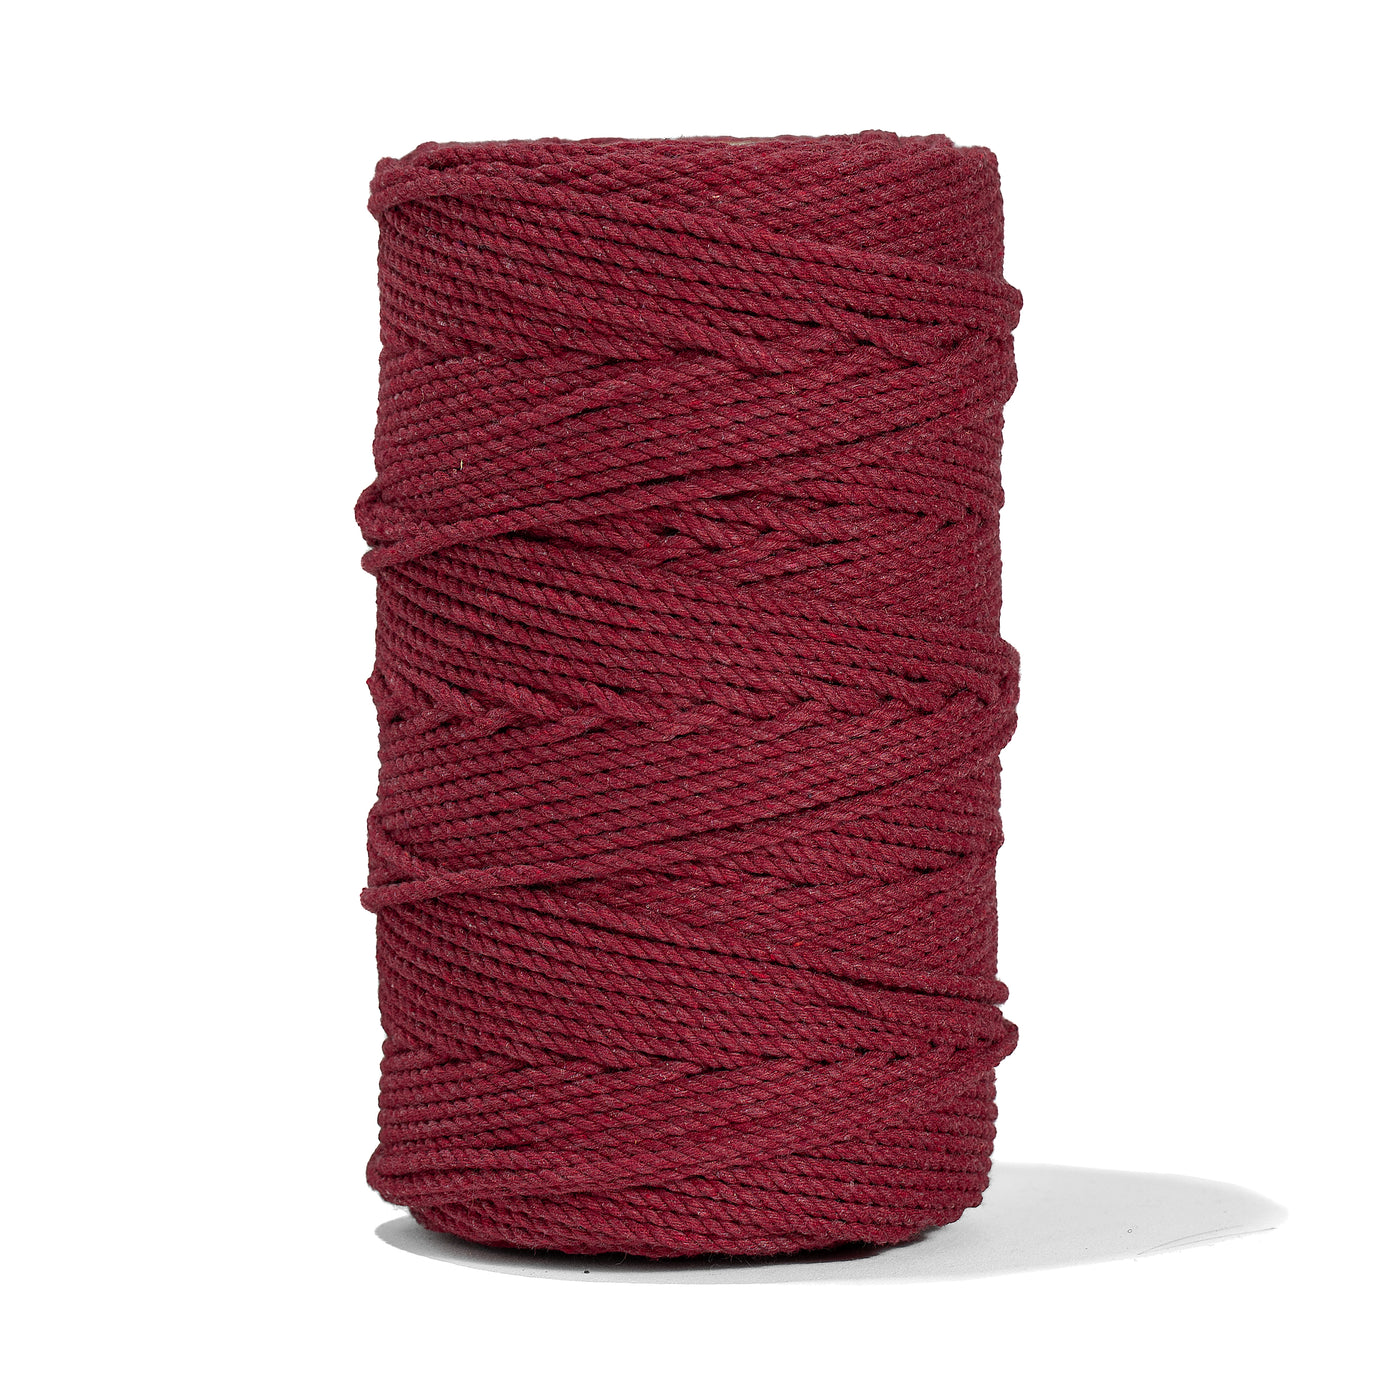 COTTON ROPE ZERO WASTE 2 MM - 3 PLY - BERRY RED COLOR